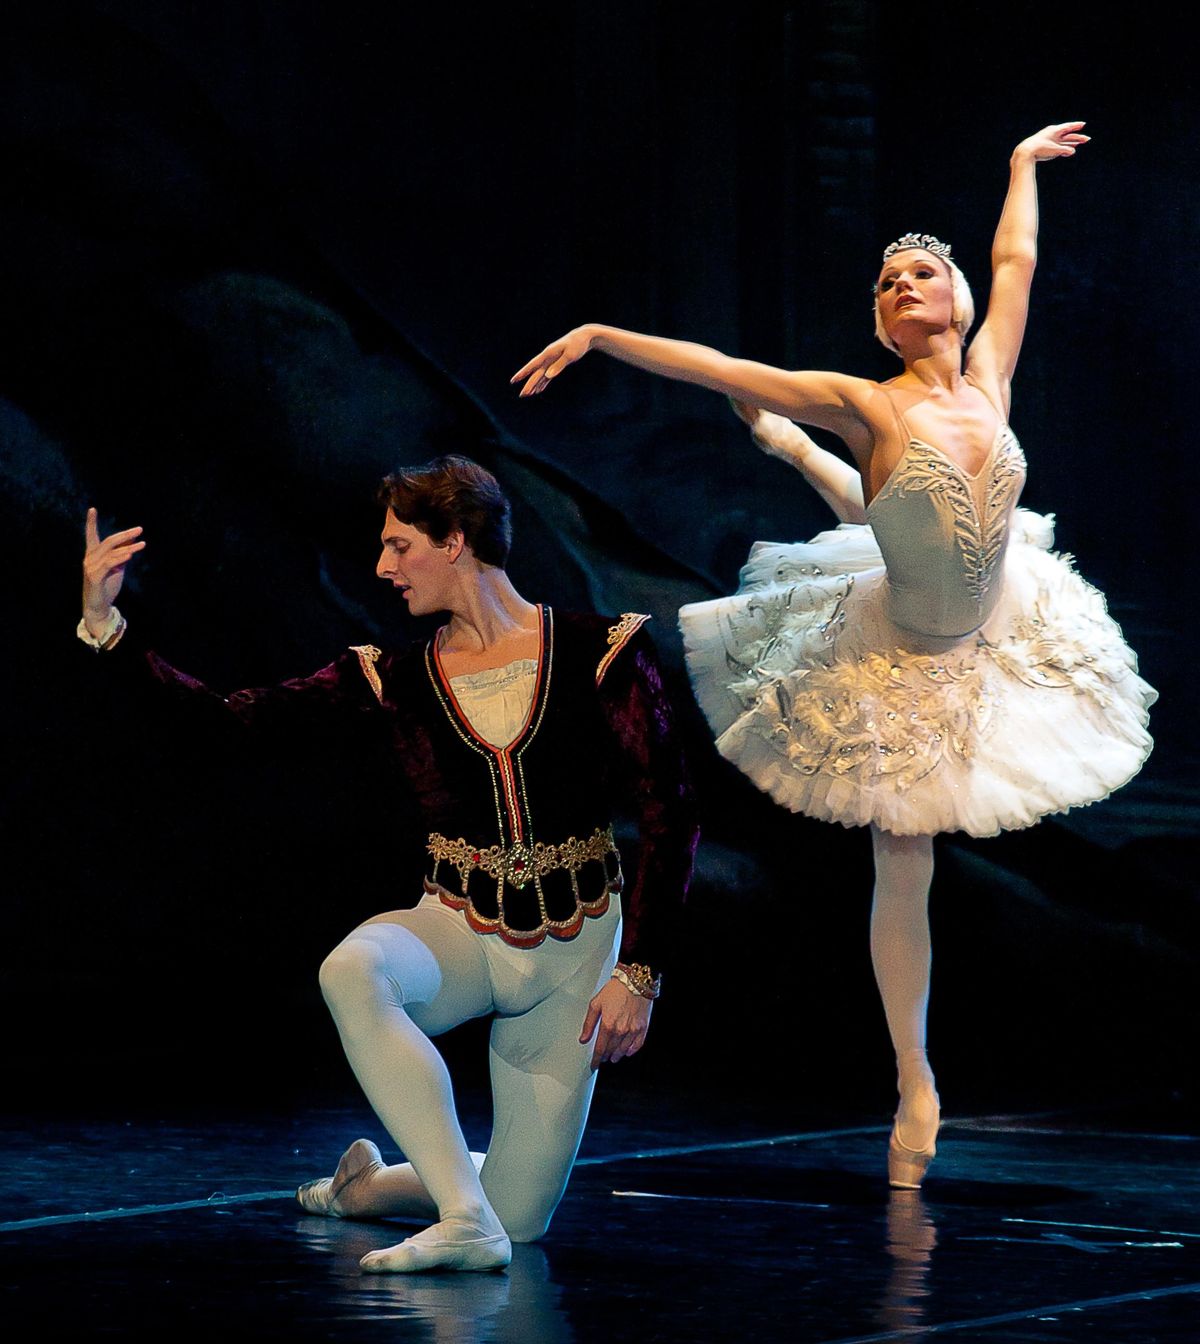 The Russian Grand Ballet will perform Swan Lake at the Bing Crosby Theater on Oct. 17-18. (Russian Grand Ballet / Photo courtesy of the Russian Grand Ballet)